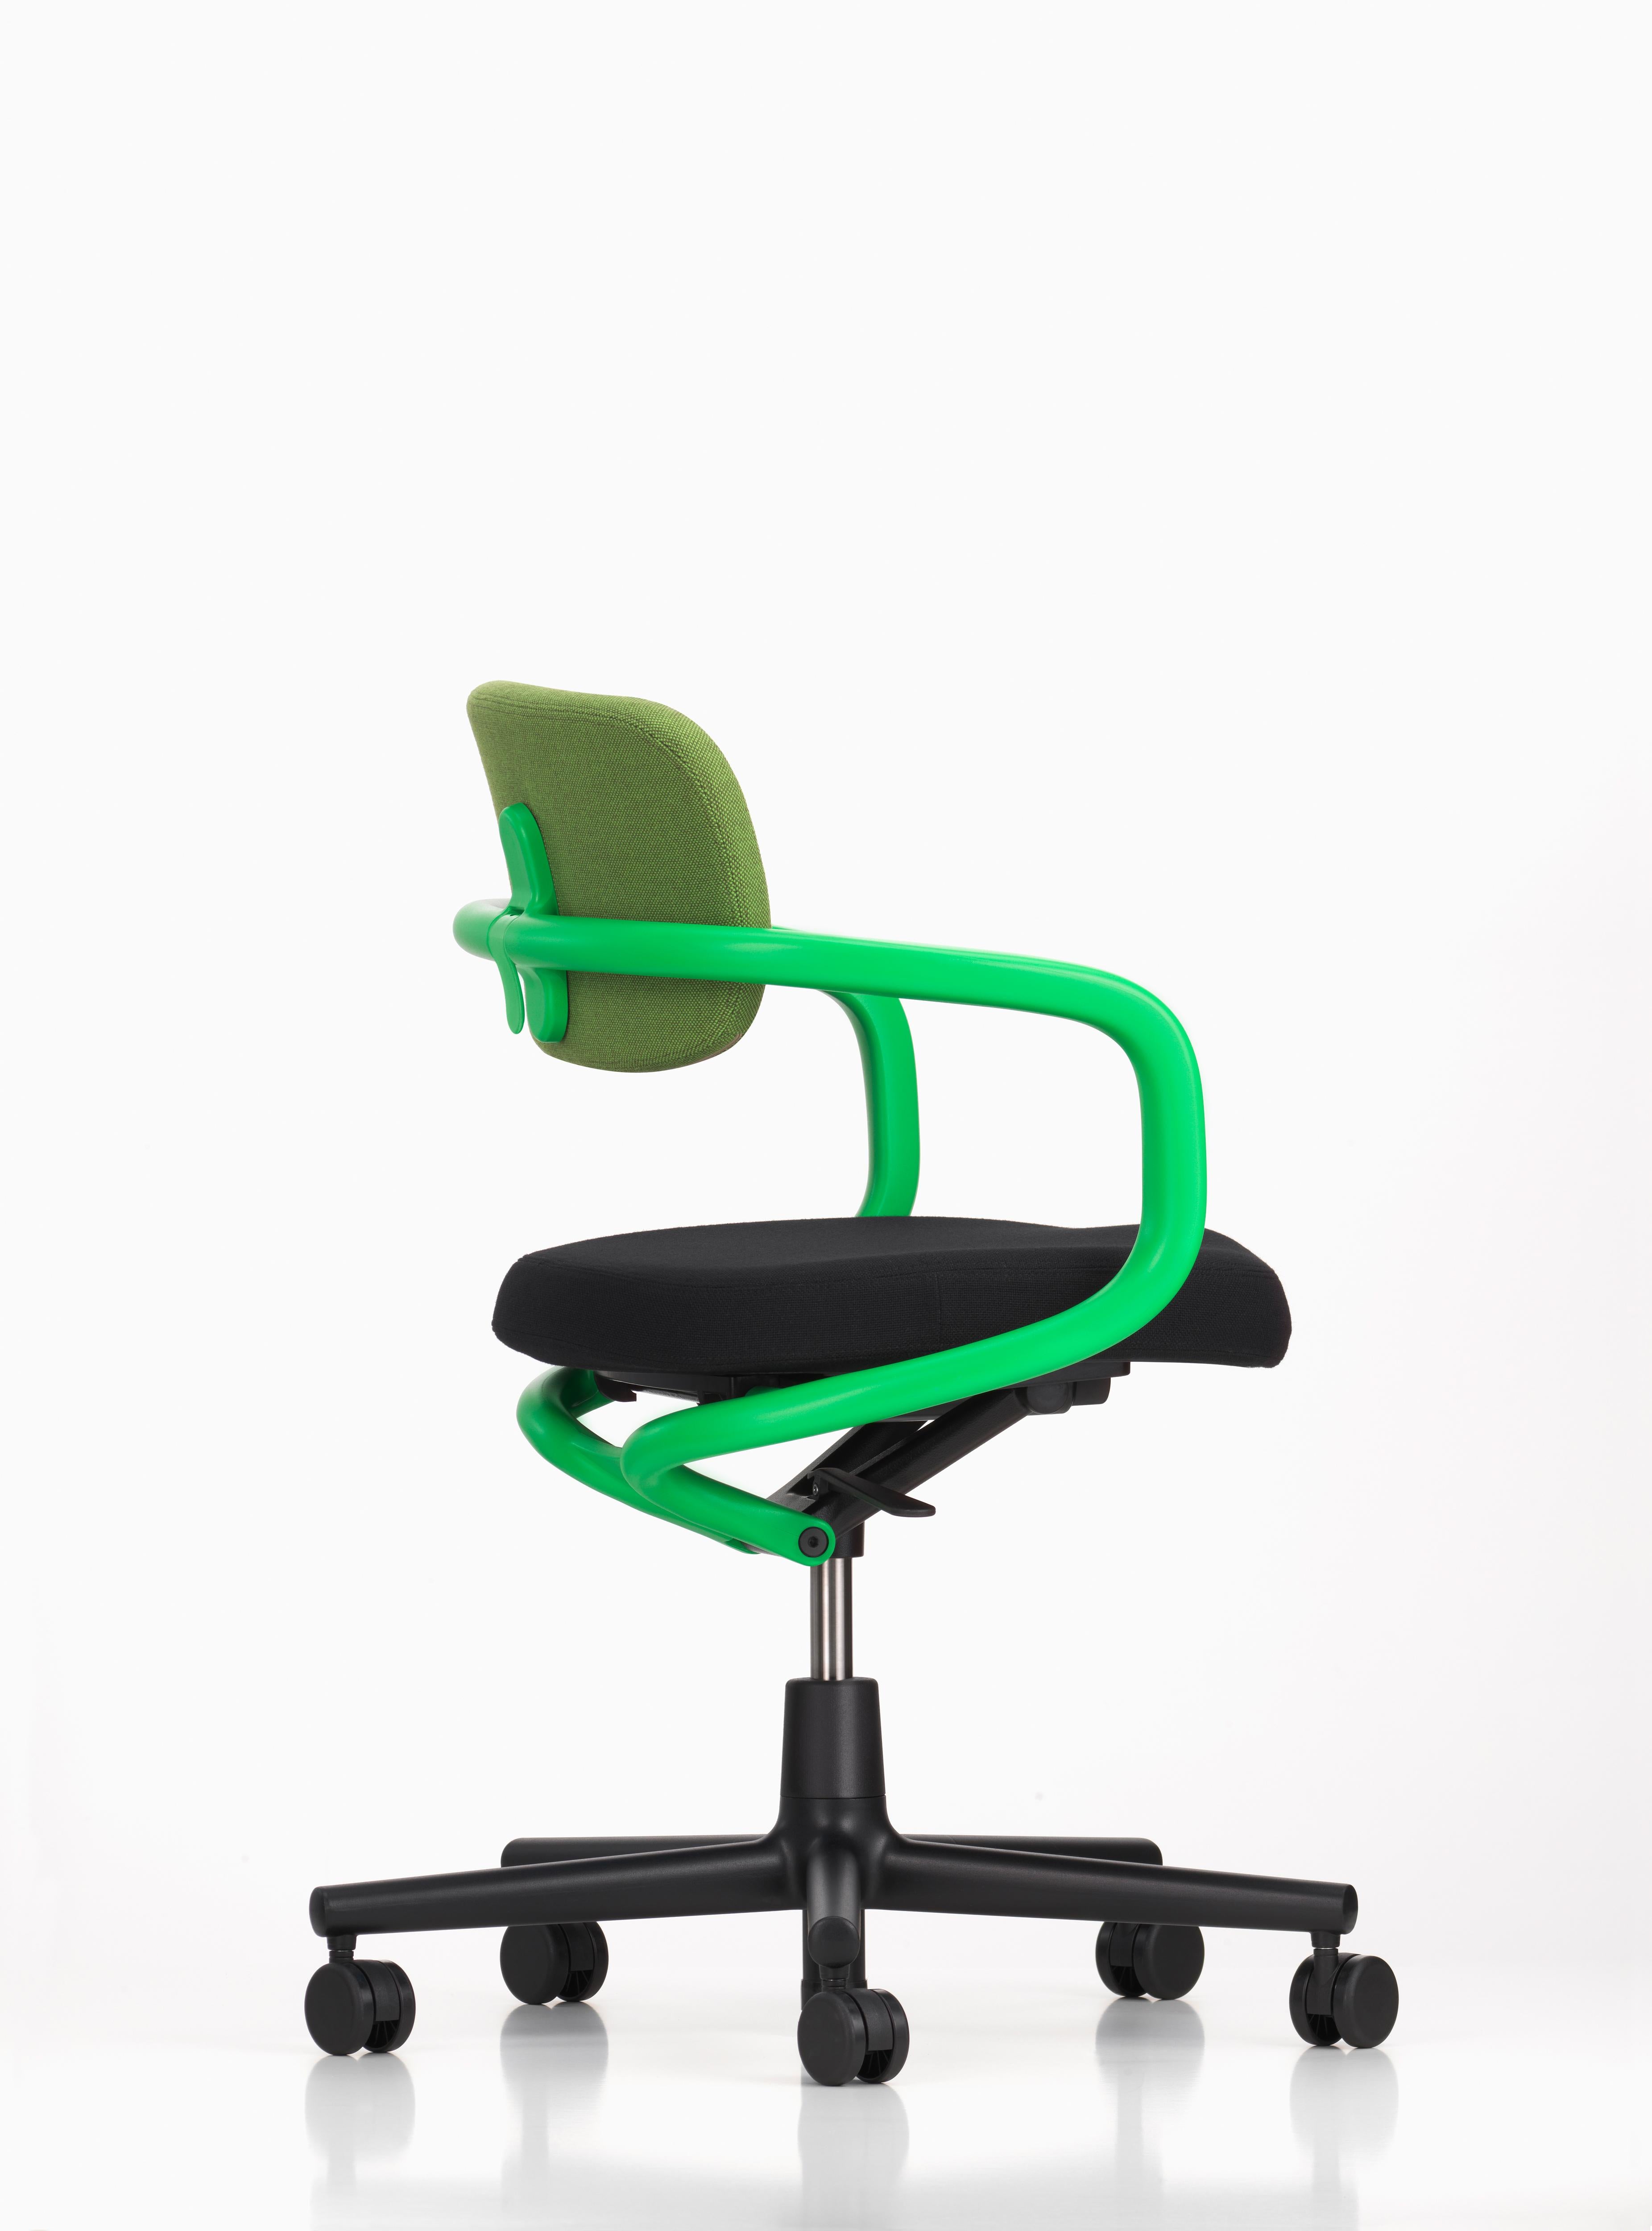 Modern Vitra Allstar Chair in Grass & Green Forest and Nero Hopsak by Konstantin Grcic For Sale